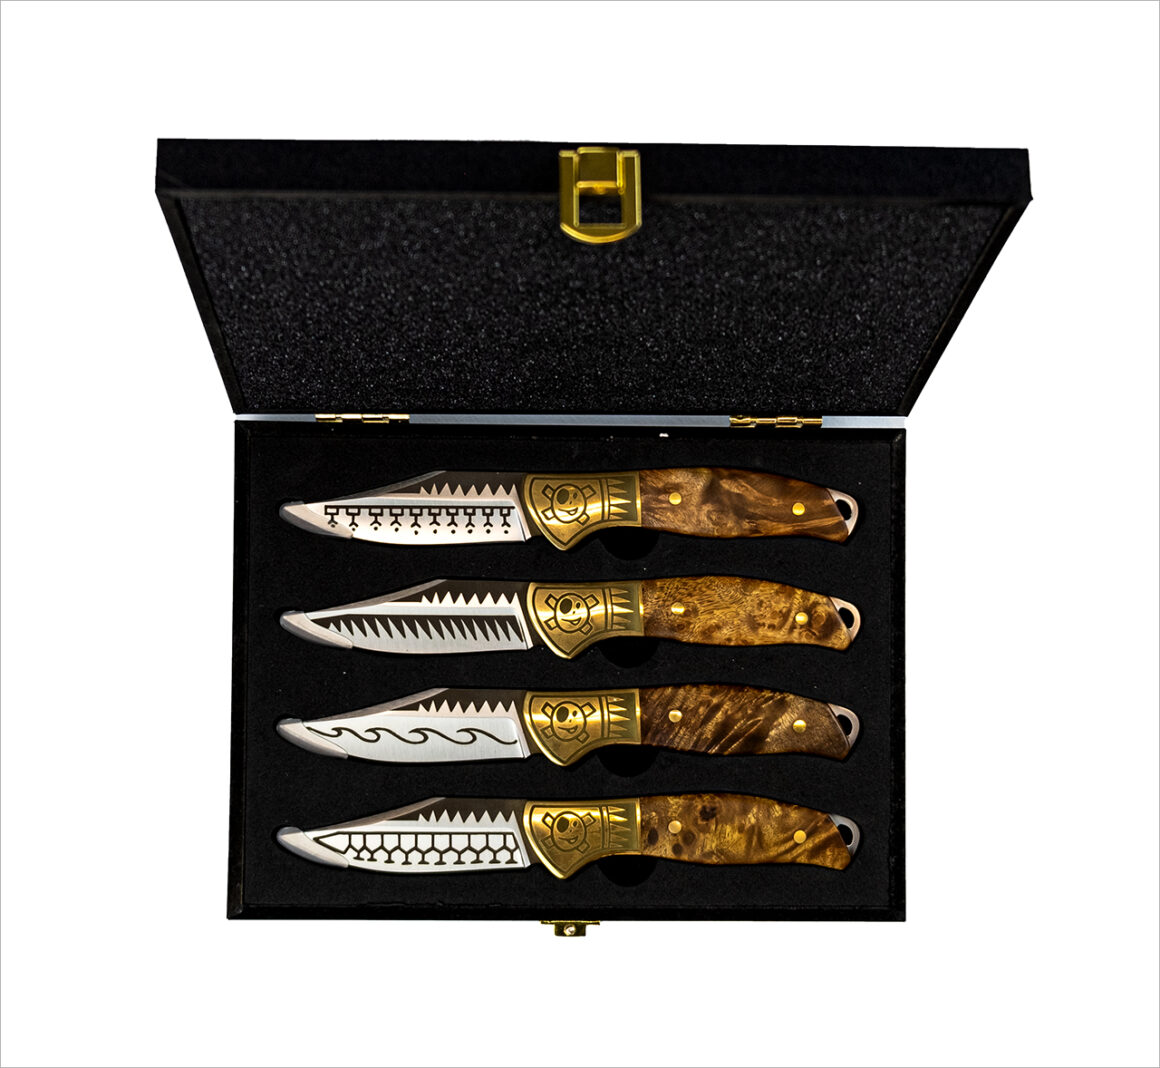 HOMEY’s Tolls for Life: the new knife set by Henk Schiffmacher